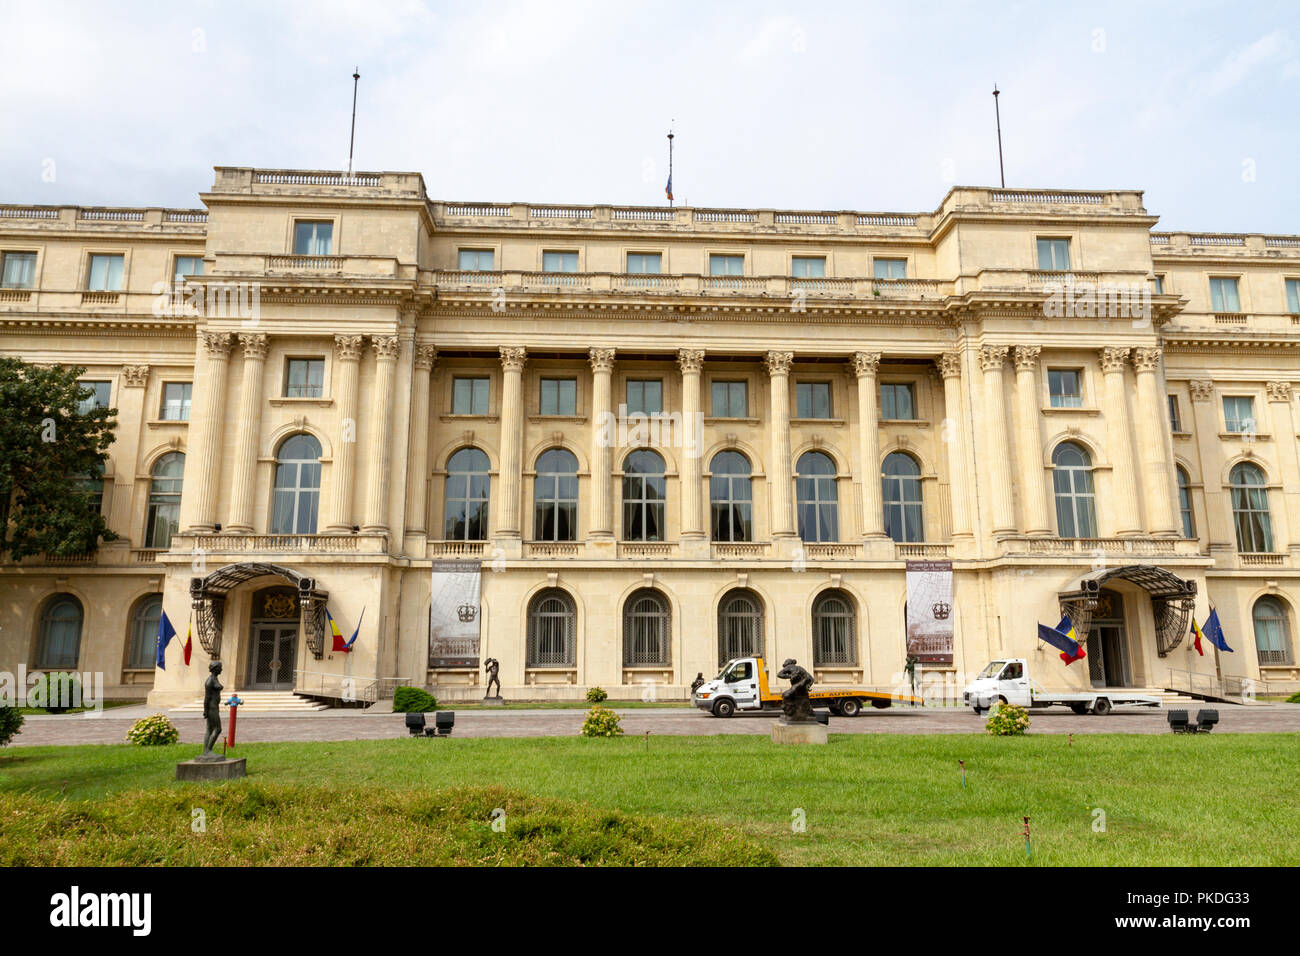 The Royal Palace of Bucharest (or just the Royal Palace, Palatul Regal) home to the National Museum of Art of Romania in Bucharest, Romania. Stock Photo